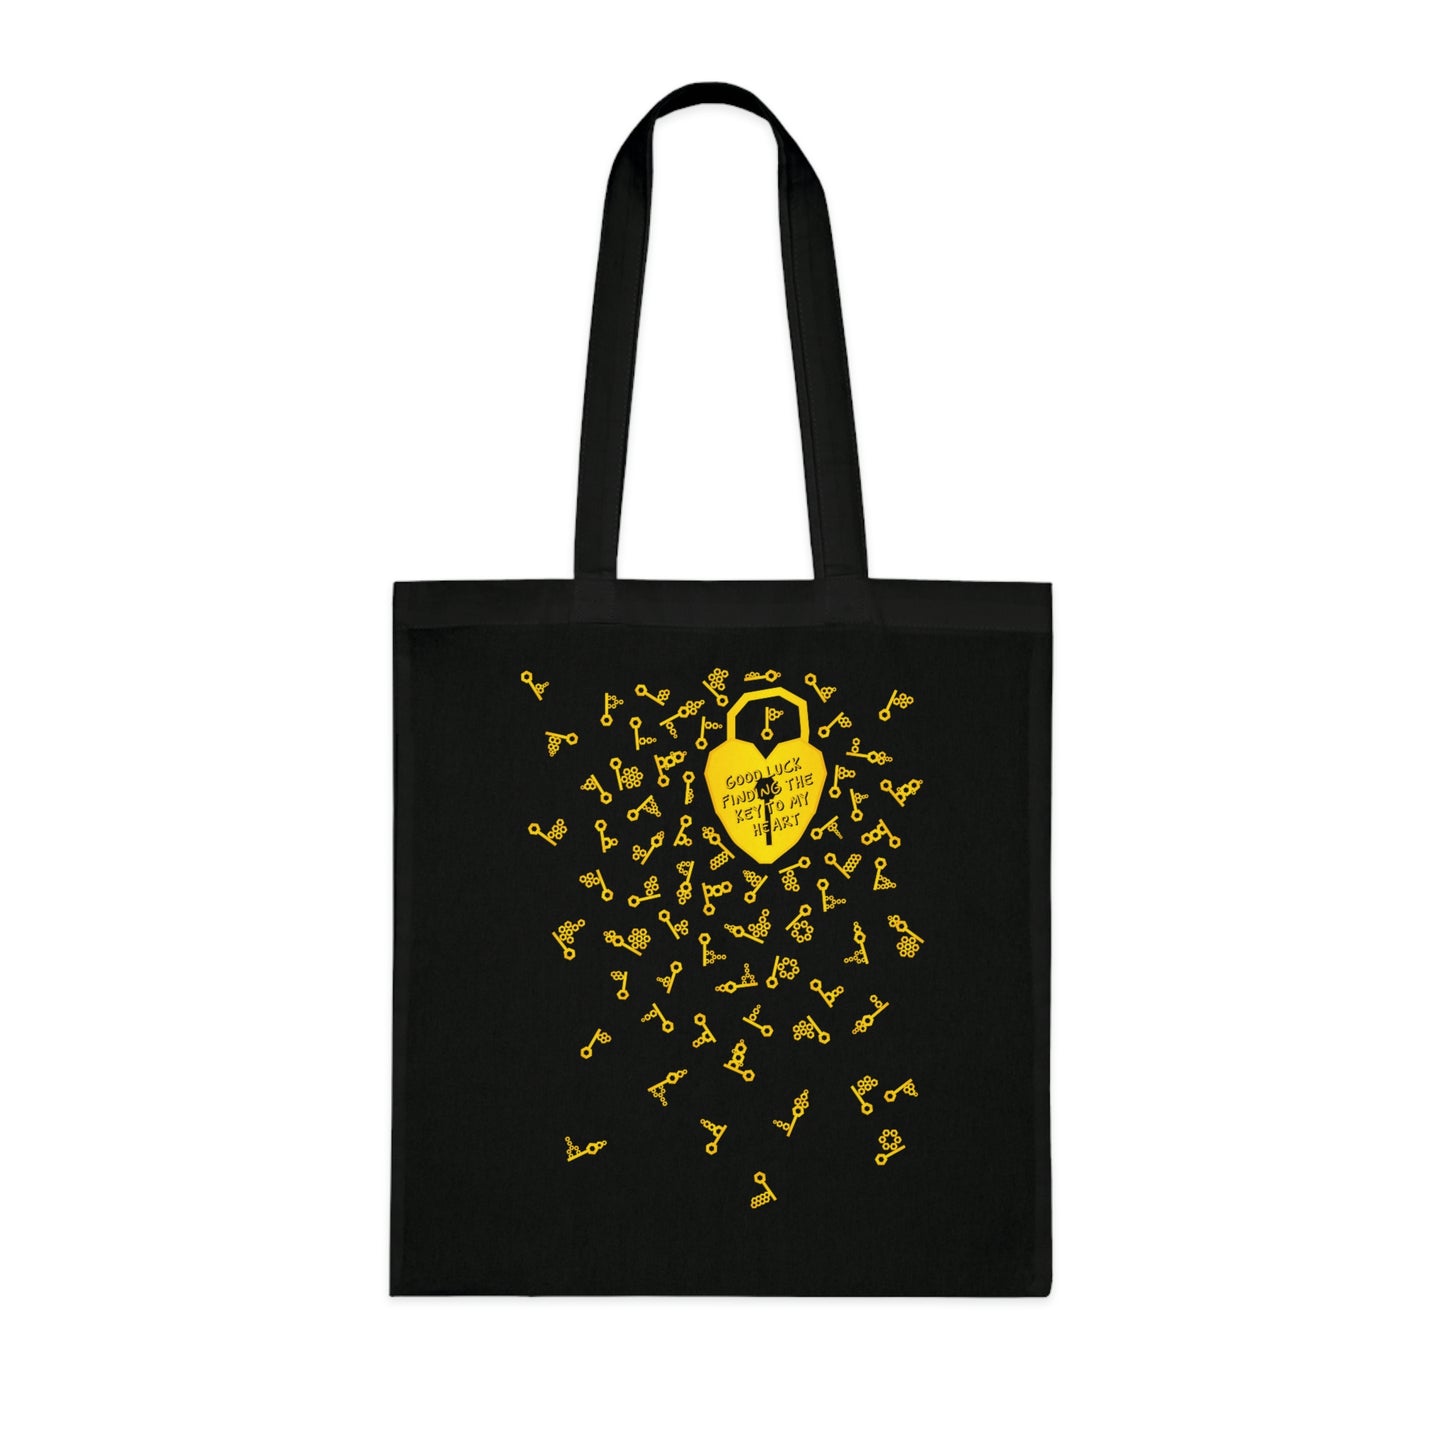 Weirdo | This black cotton tote bag is durable and funny! If you’re looking for a shopping bag with a funny meme, check this out! Funny meme: Good luck finding the key to my heart!